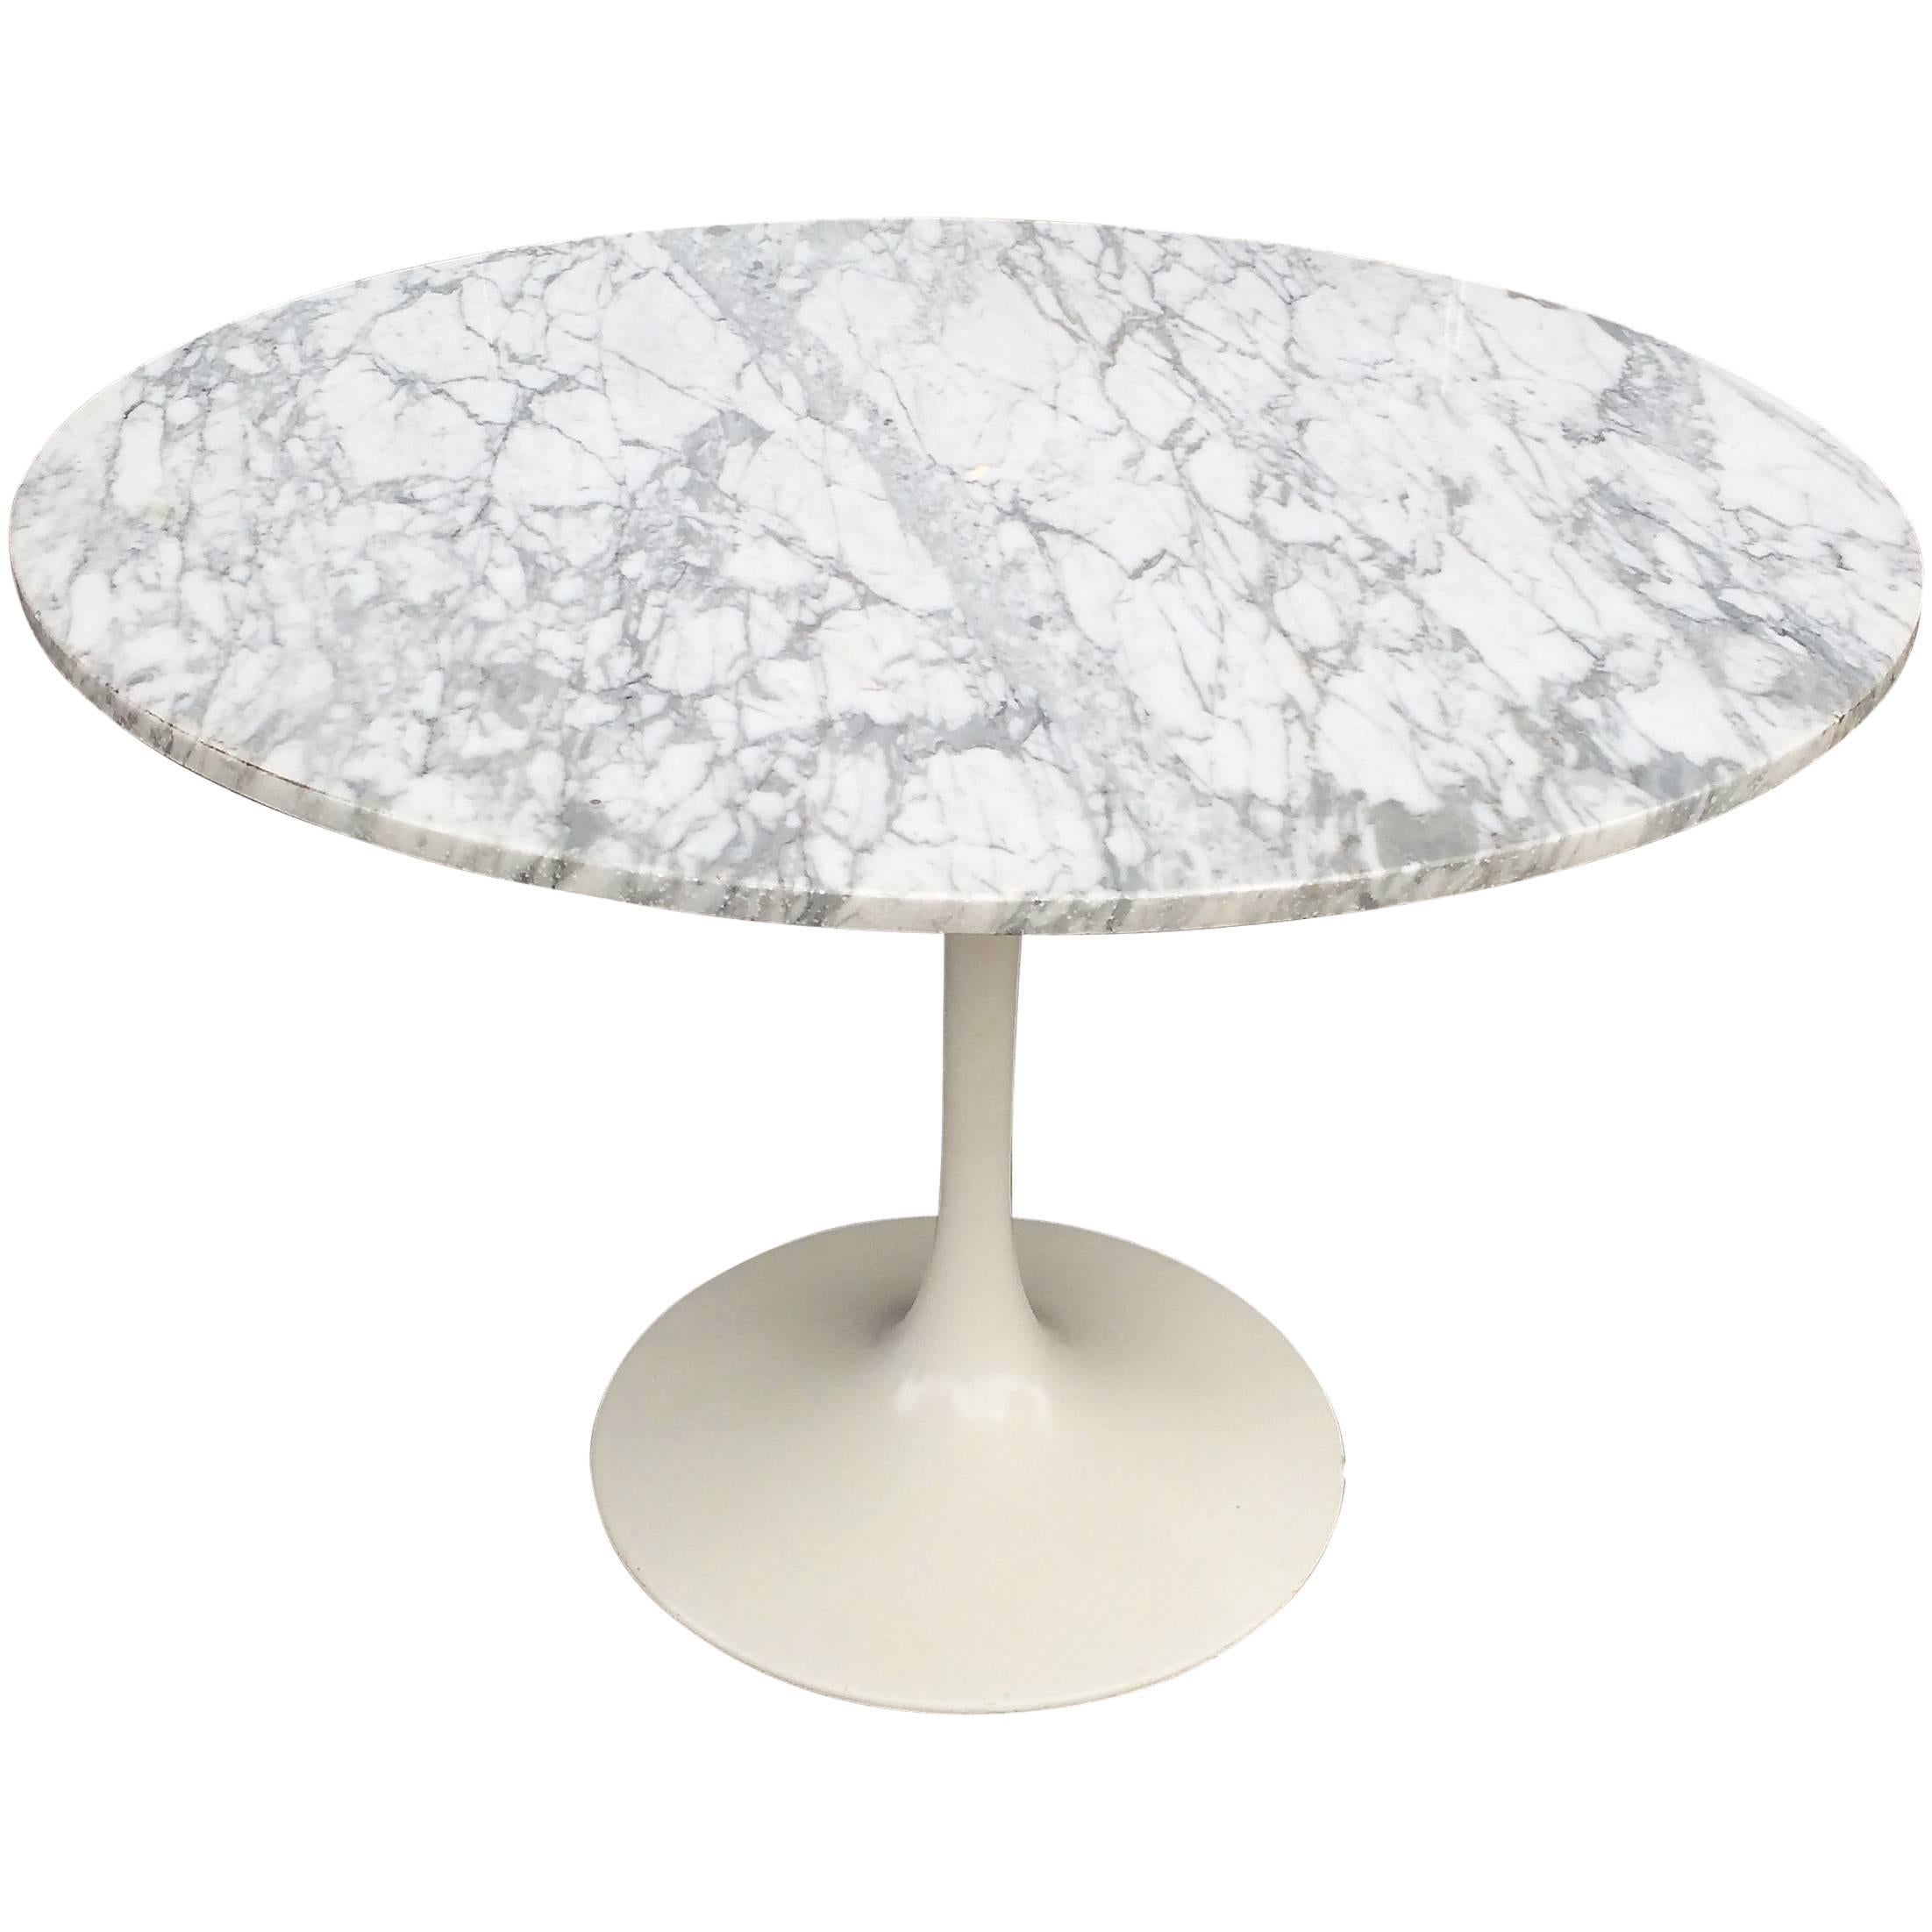 Mid-Century Modern Tulip Base Dining Table with Round Marble Top